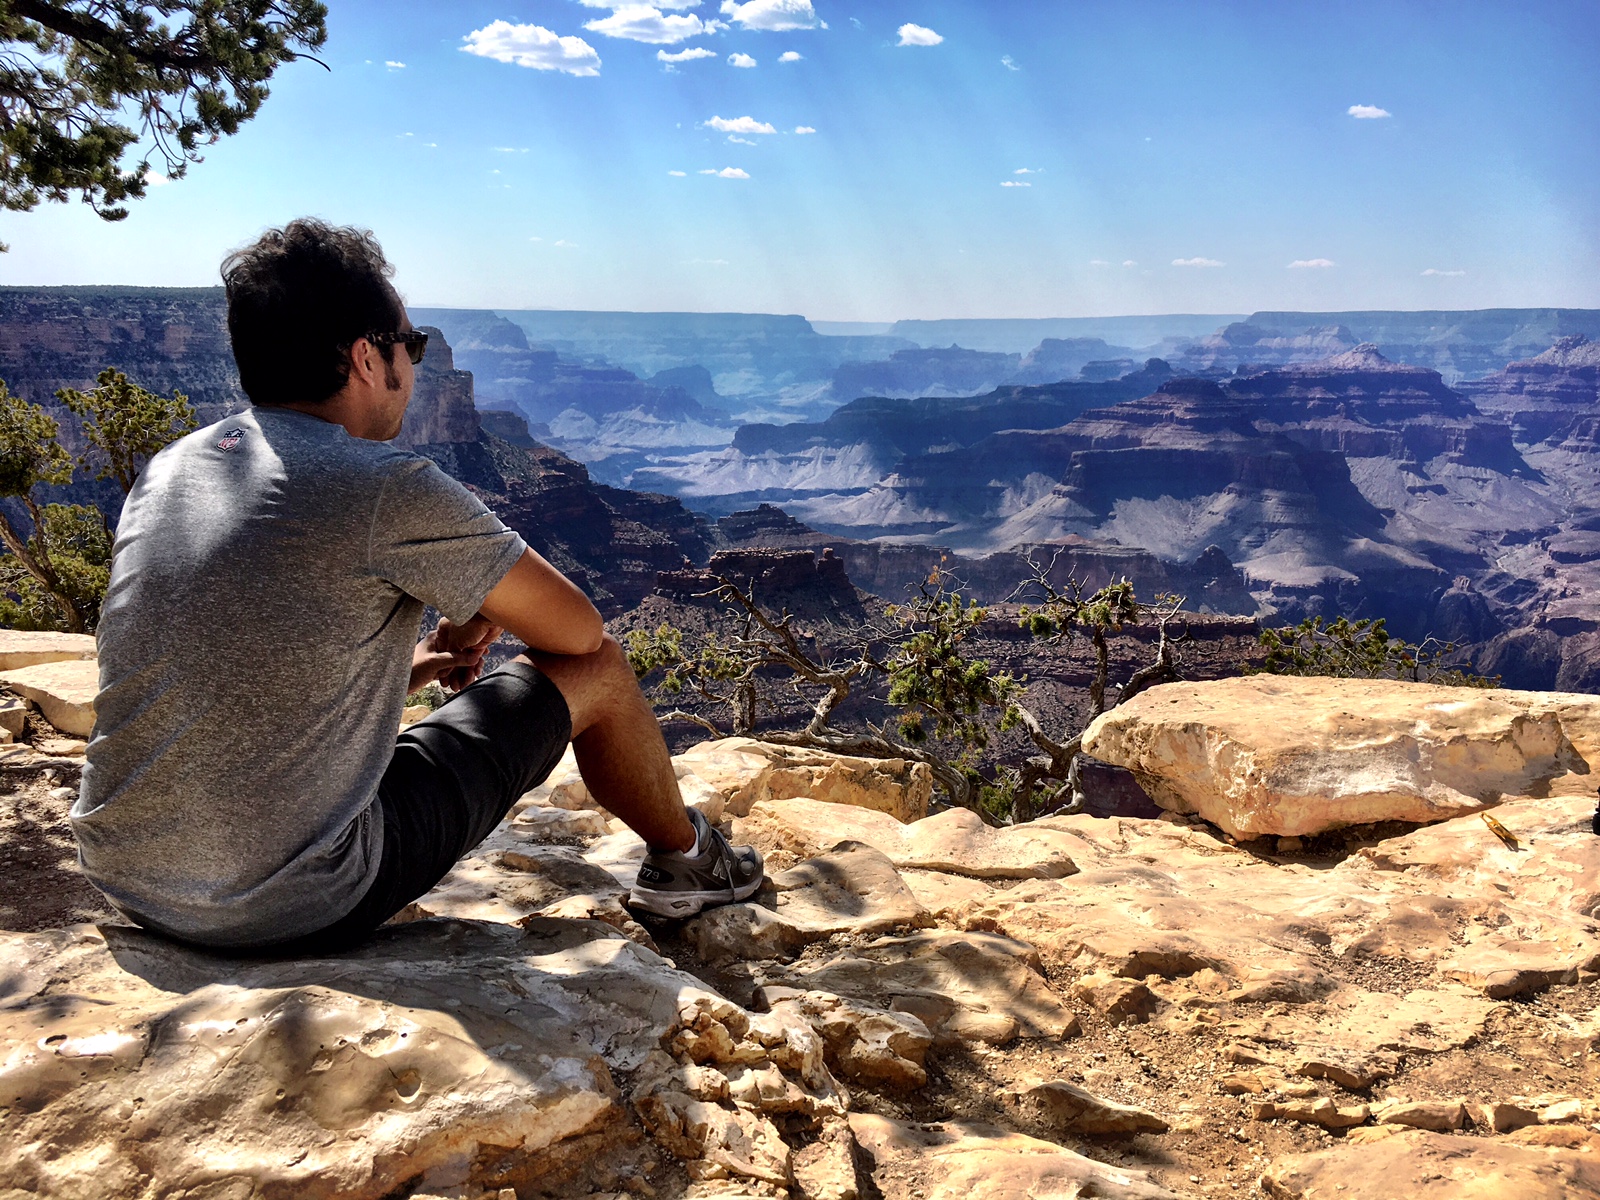 Take a moment to admire the Grand Canyon